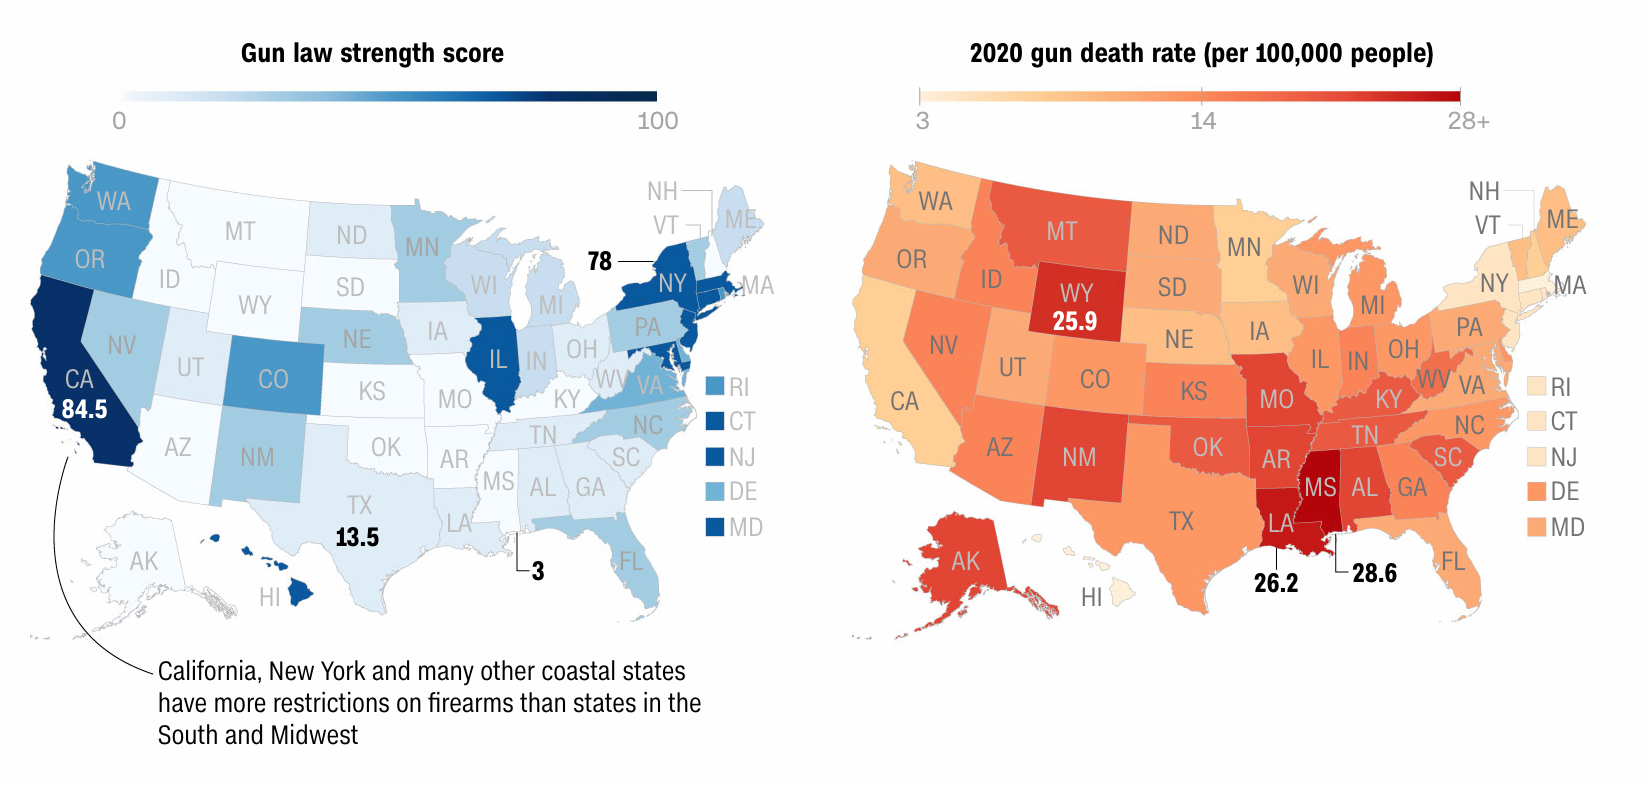 Cnn States With Weaker Gun Laws Have Higher Rates Of Firearm Related